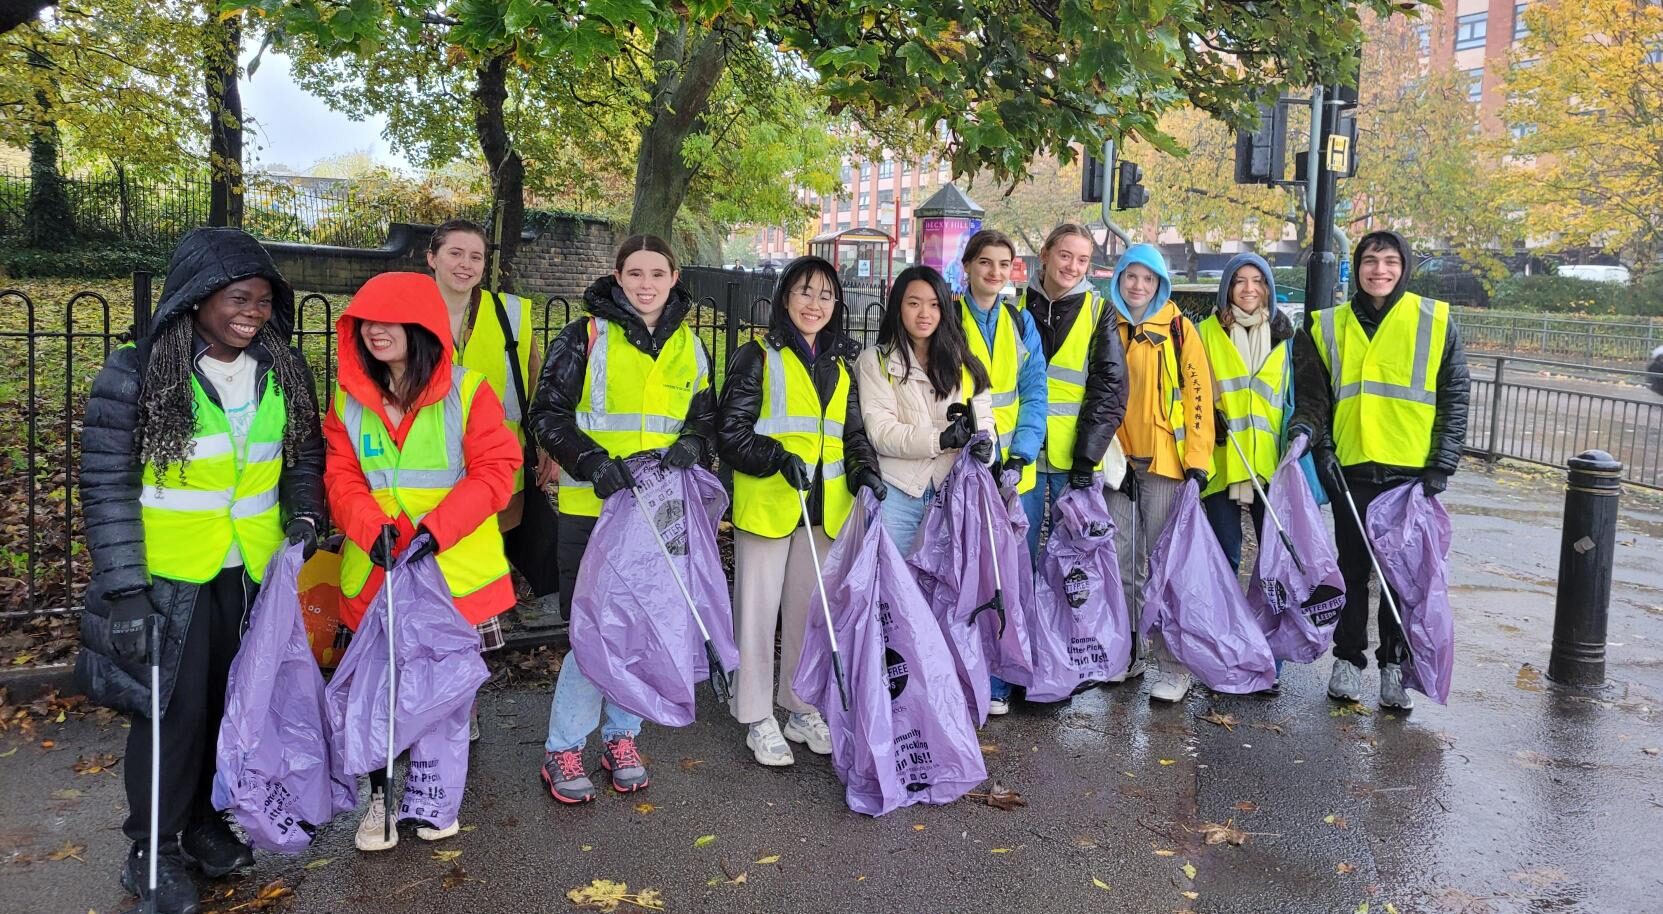 A group of students wearing high vis jackets, carrying rubbish bags and litter pickers.